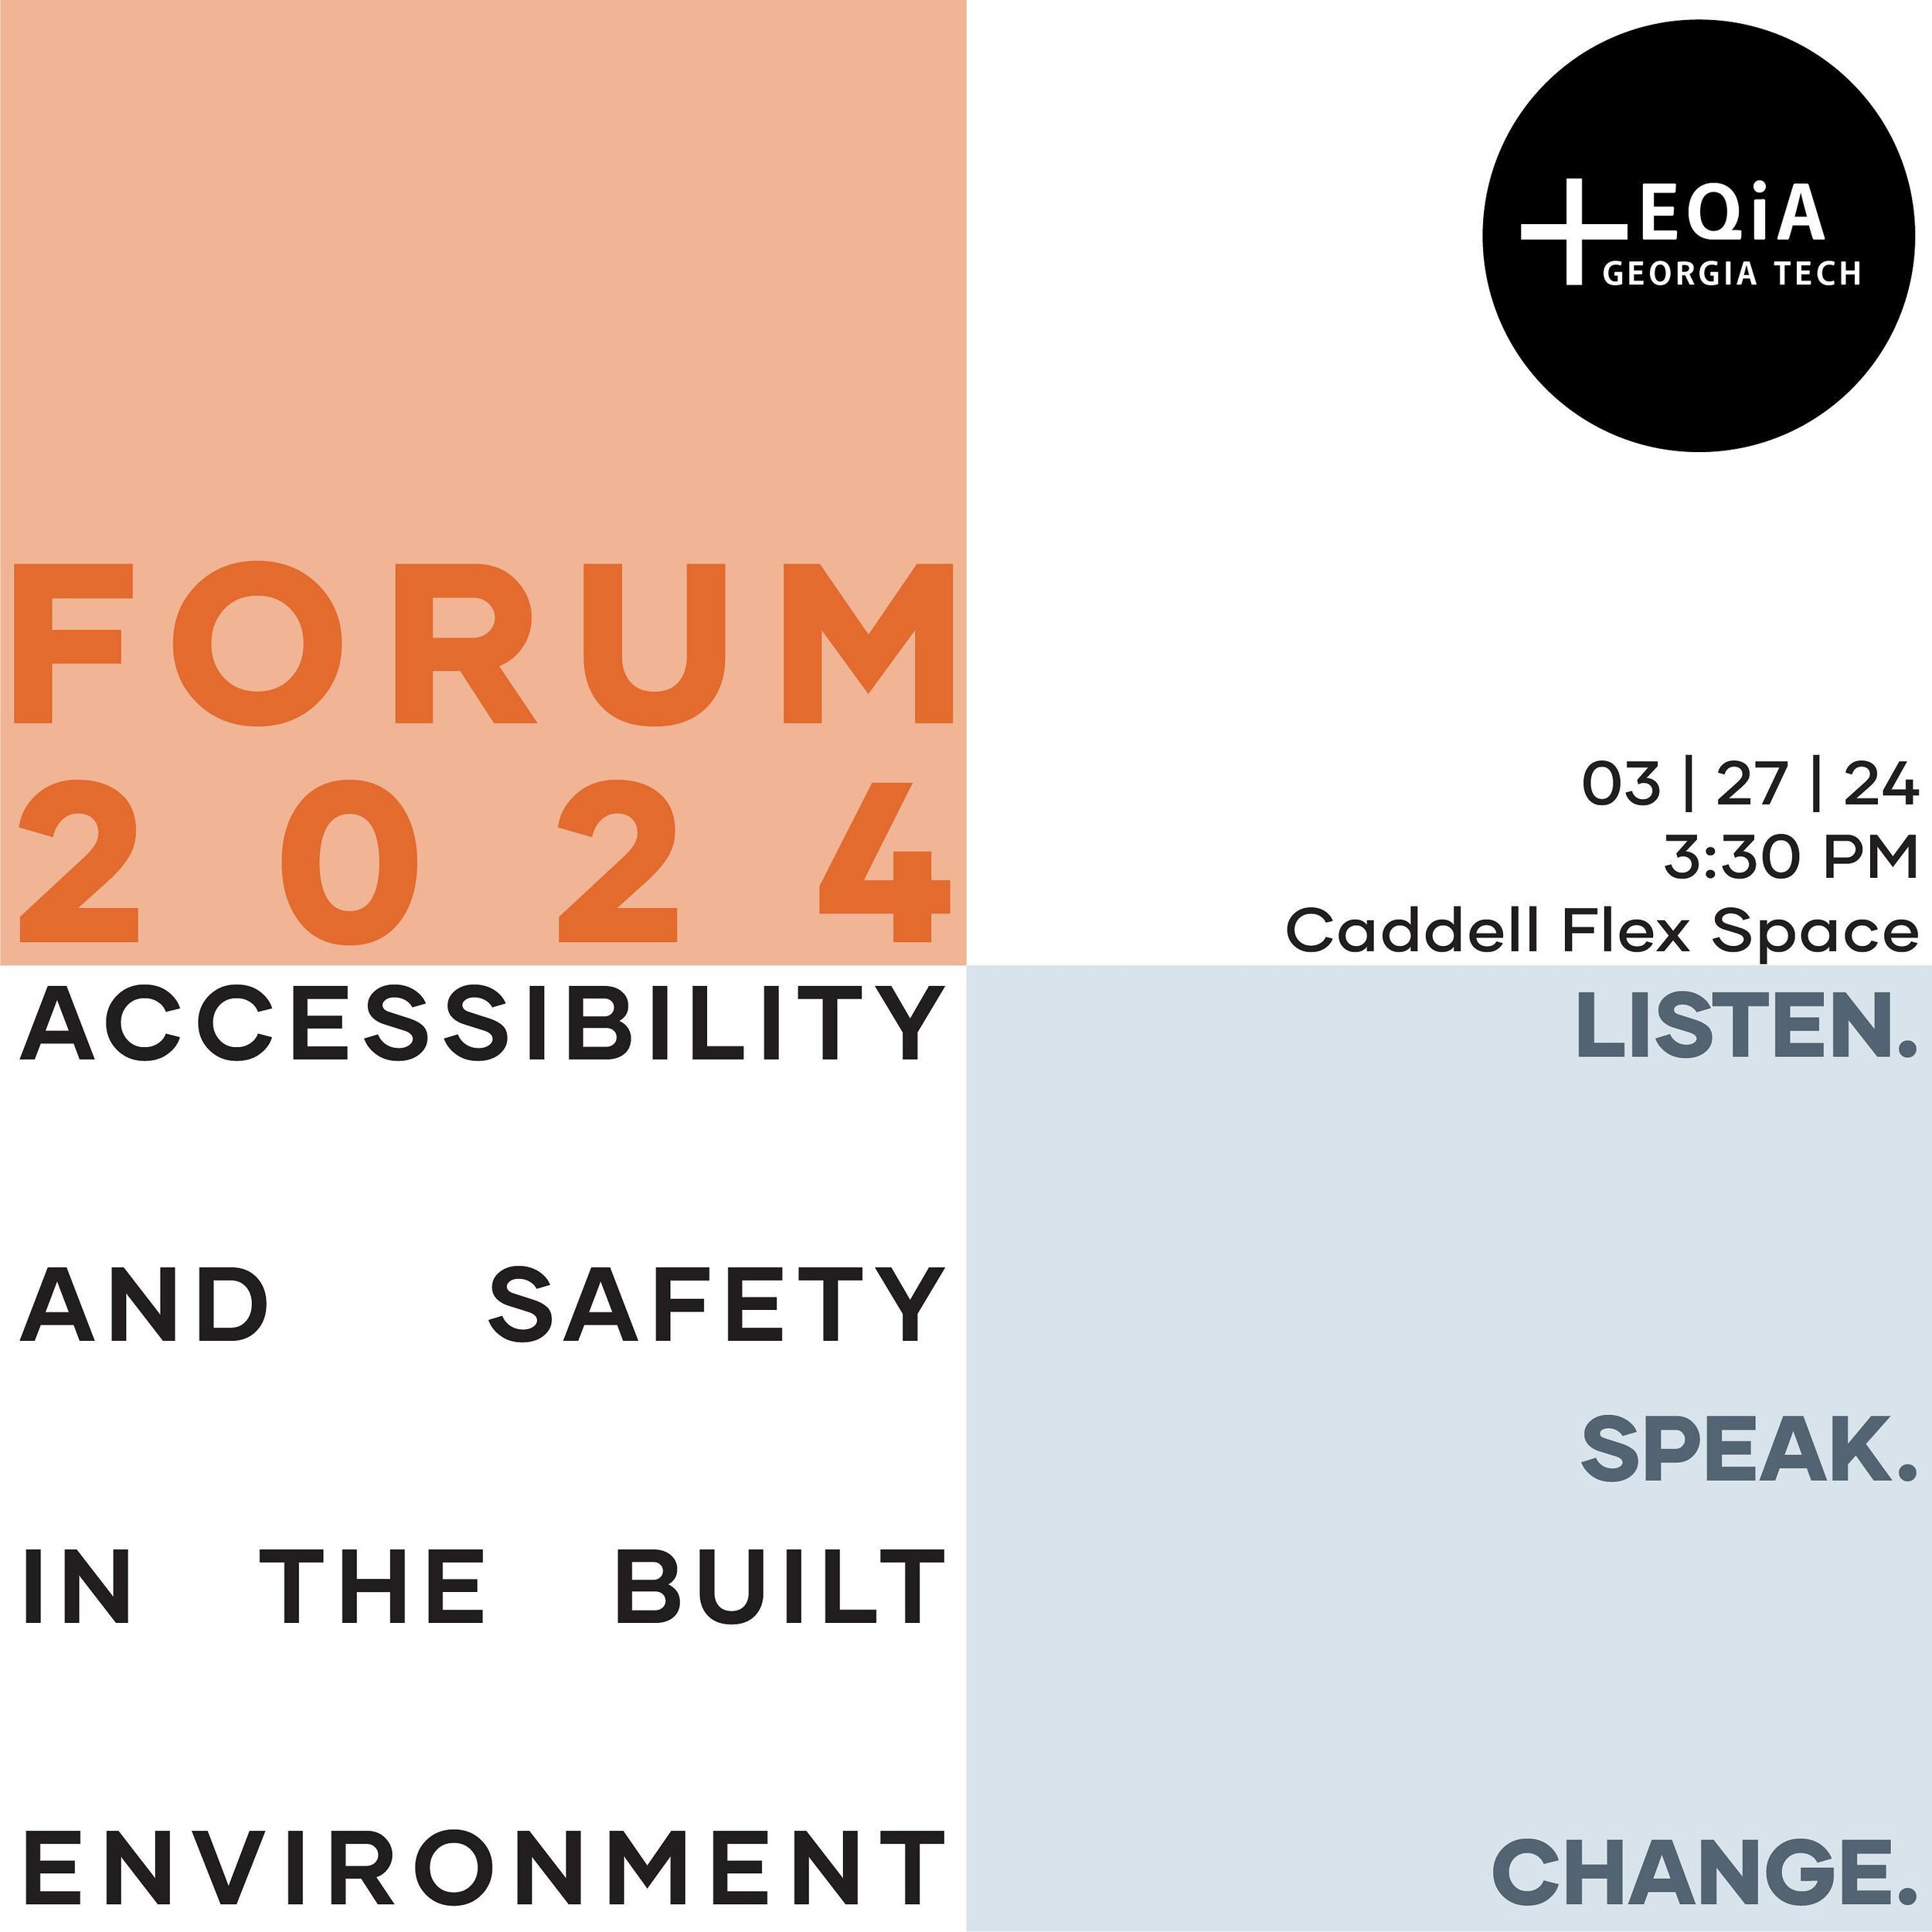 We are so excited to share this year&rsquo;s forum topic: &ldquo;Accessibility and Safety in the Built Environment&rdquo;. Join us on March 27th in the Caddell Flex Space for a passionate and educational conversation. We&rsquo;ve put together and inv